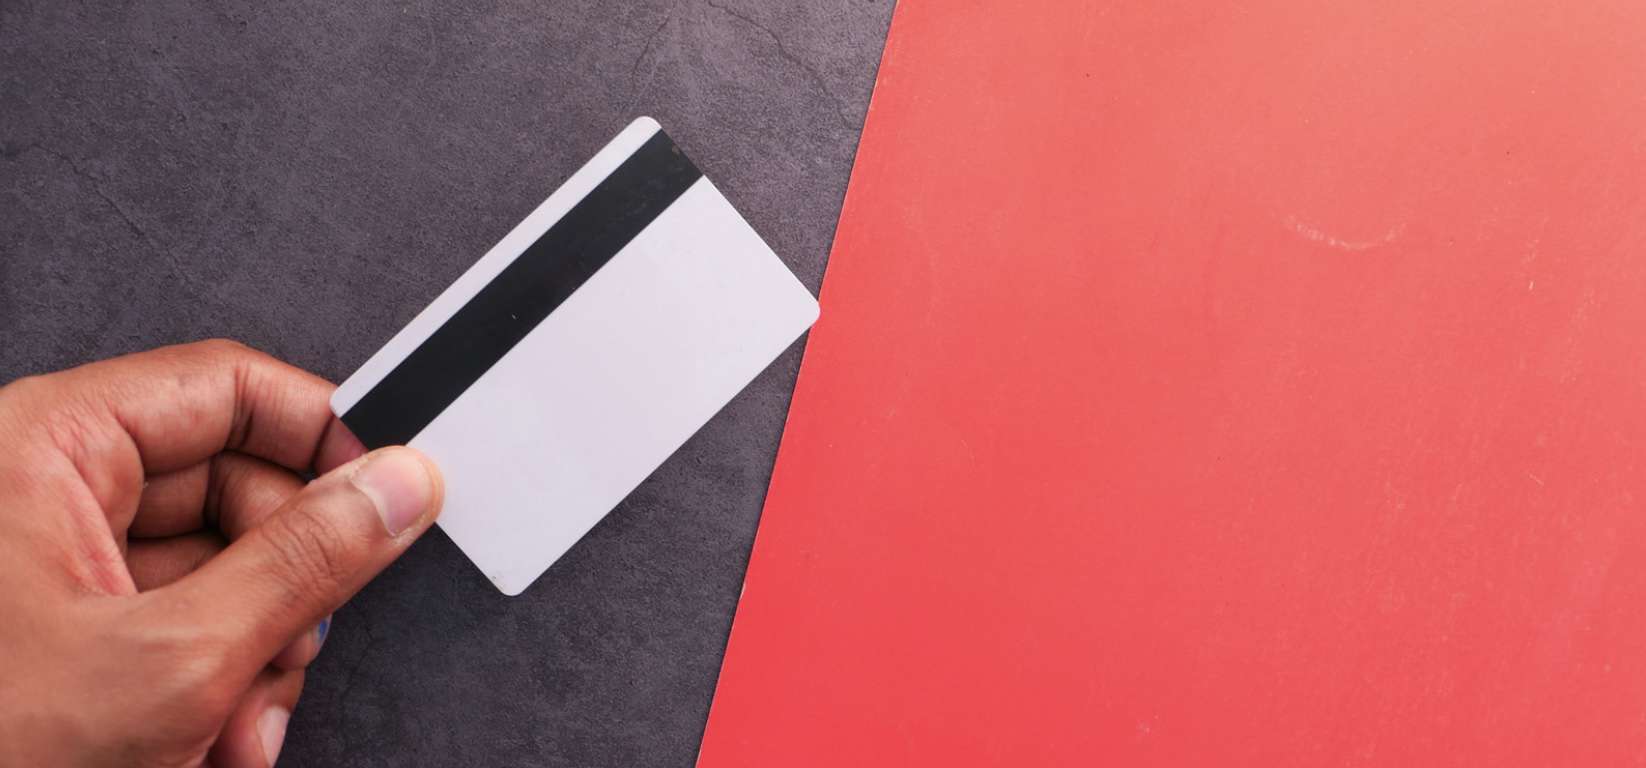 Hand-Holding-Credit-Card-on-Color-Background